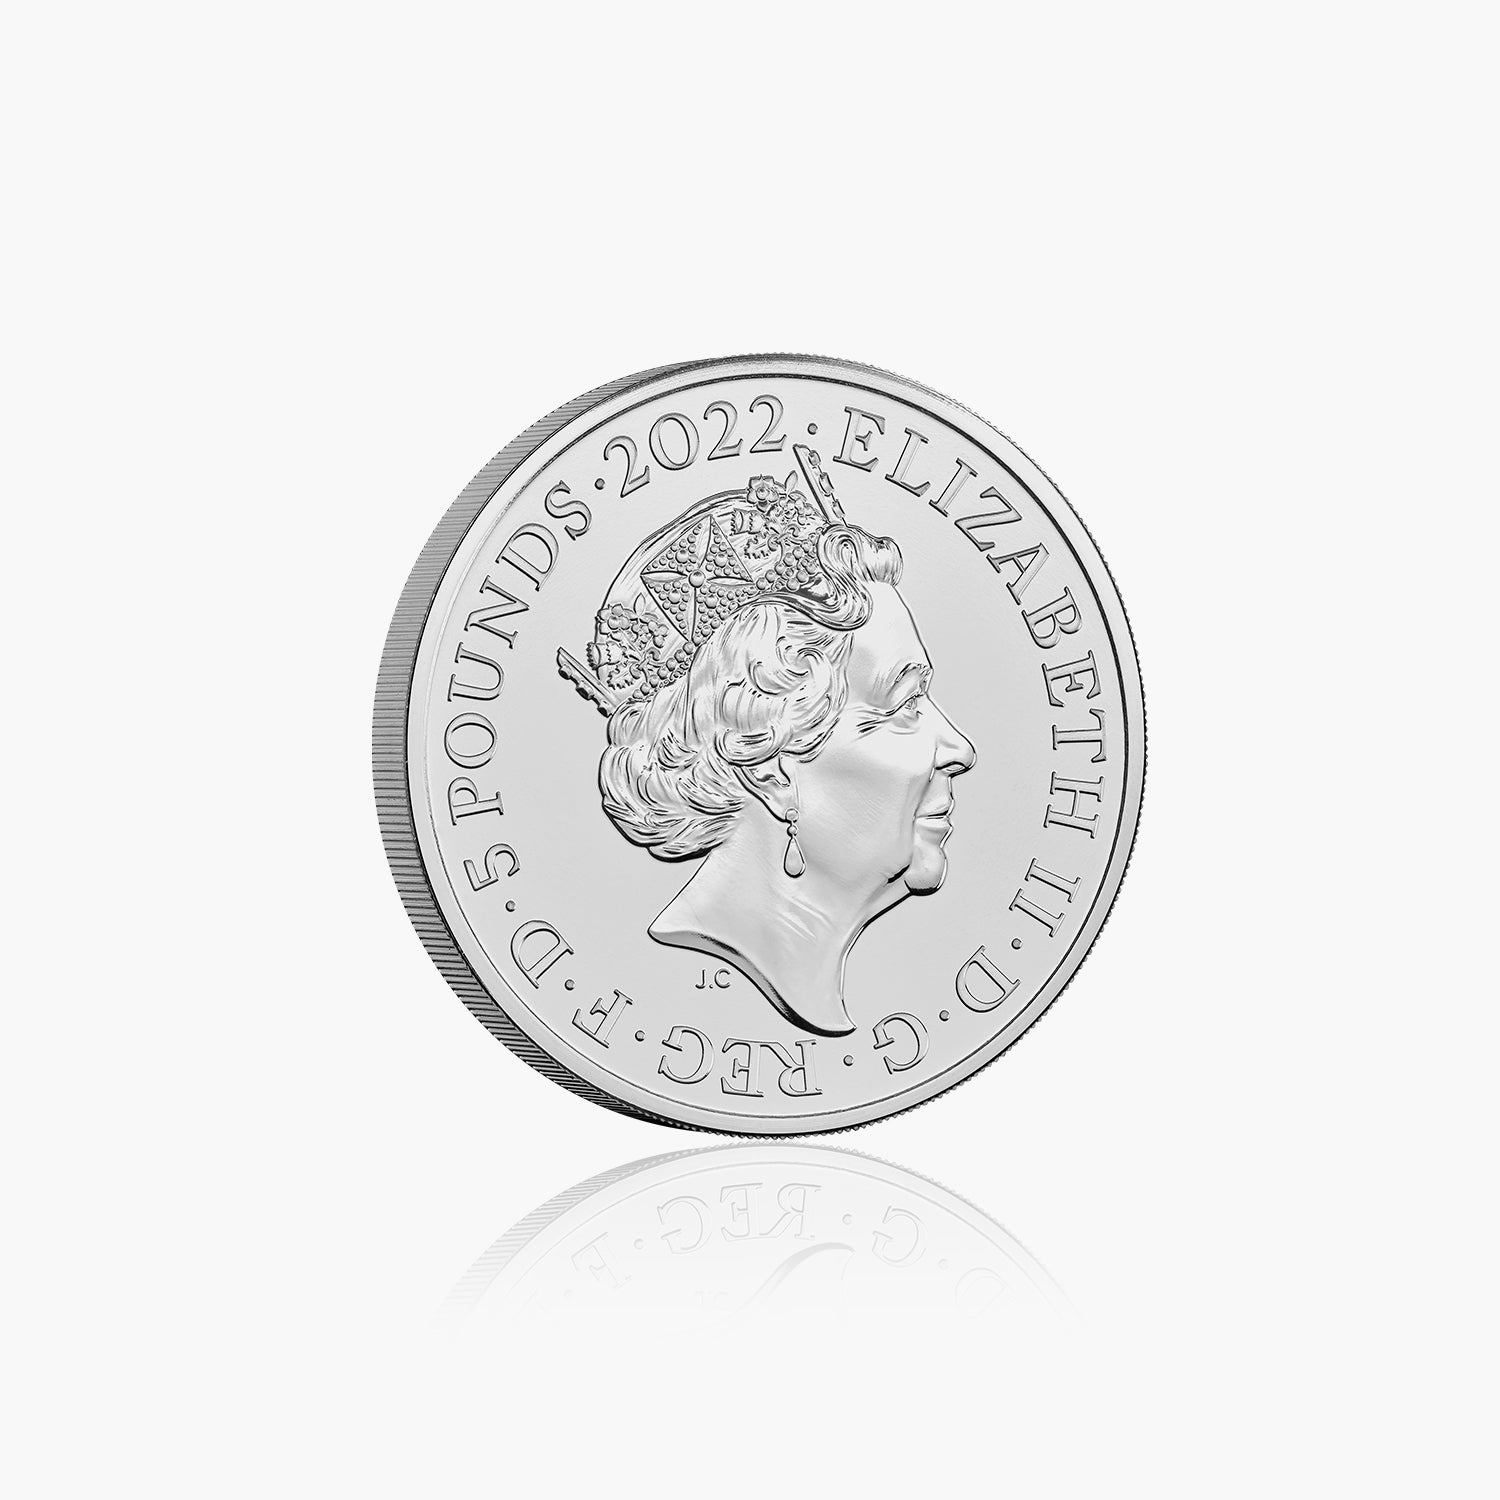 The Queen’s Reign Charity & Patronage 2022 UK £5 BU Coin